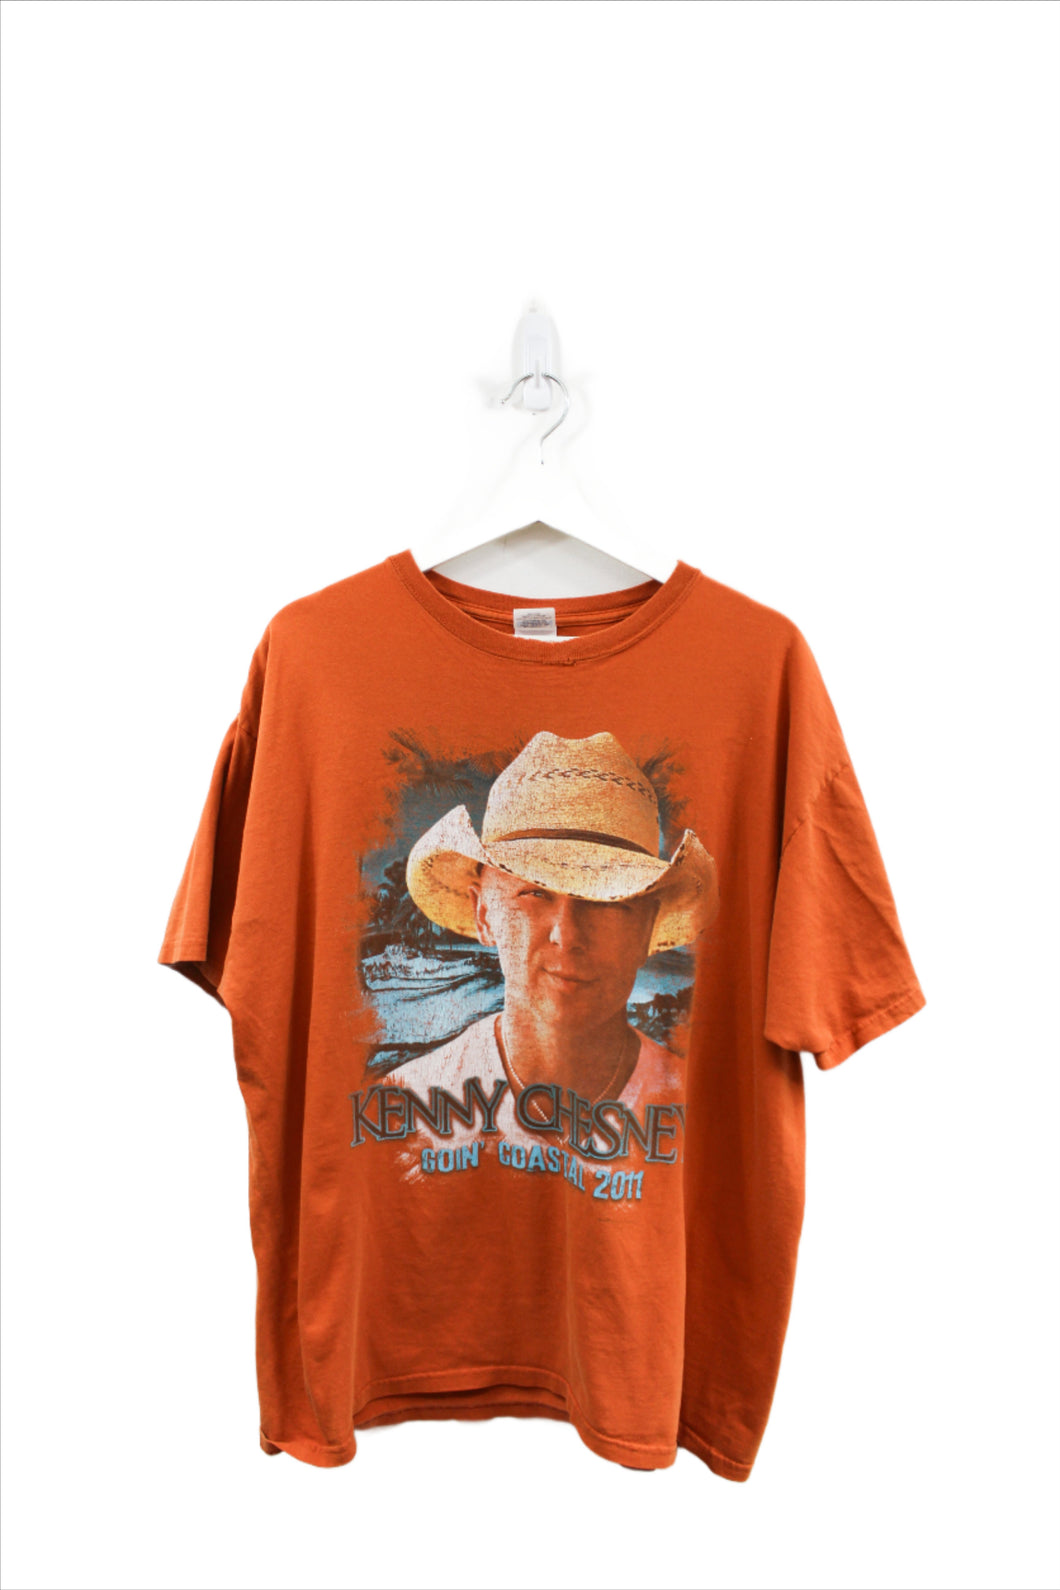 X - 2011 Kenny Chesney Goin' Coastal Picture Tee